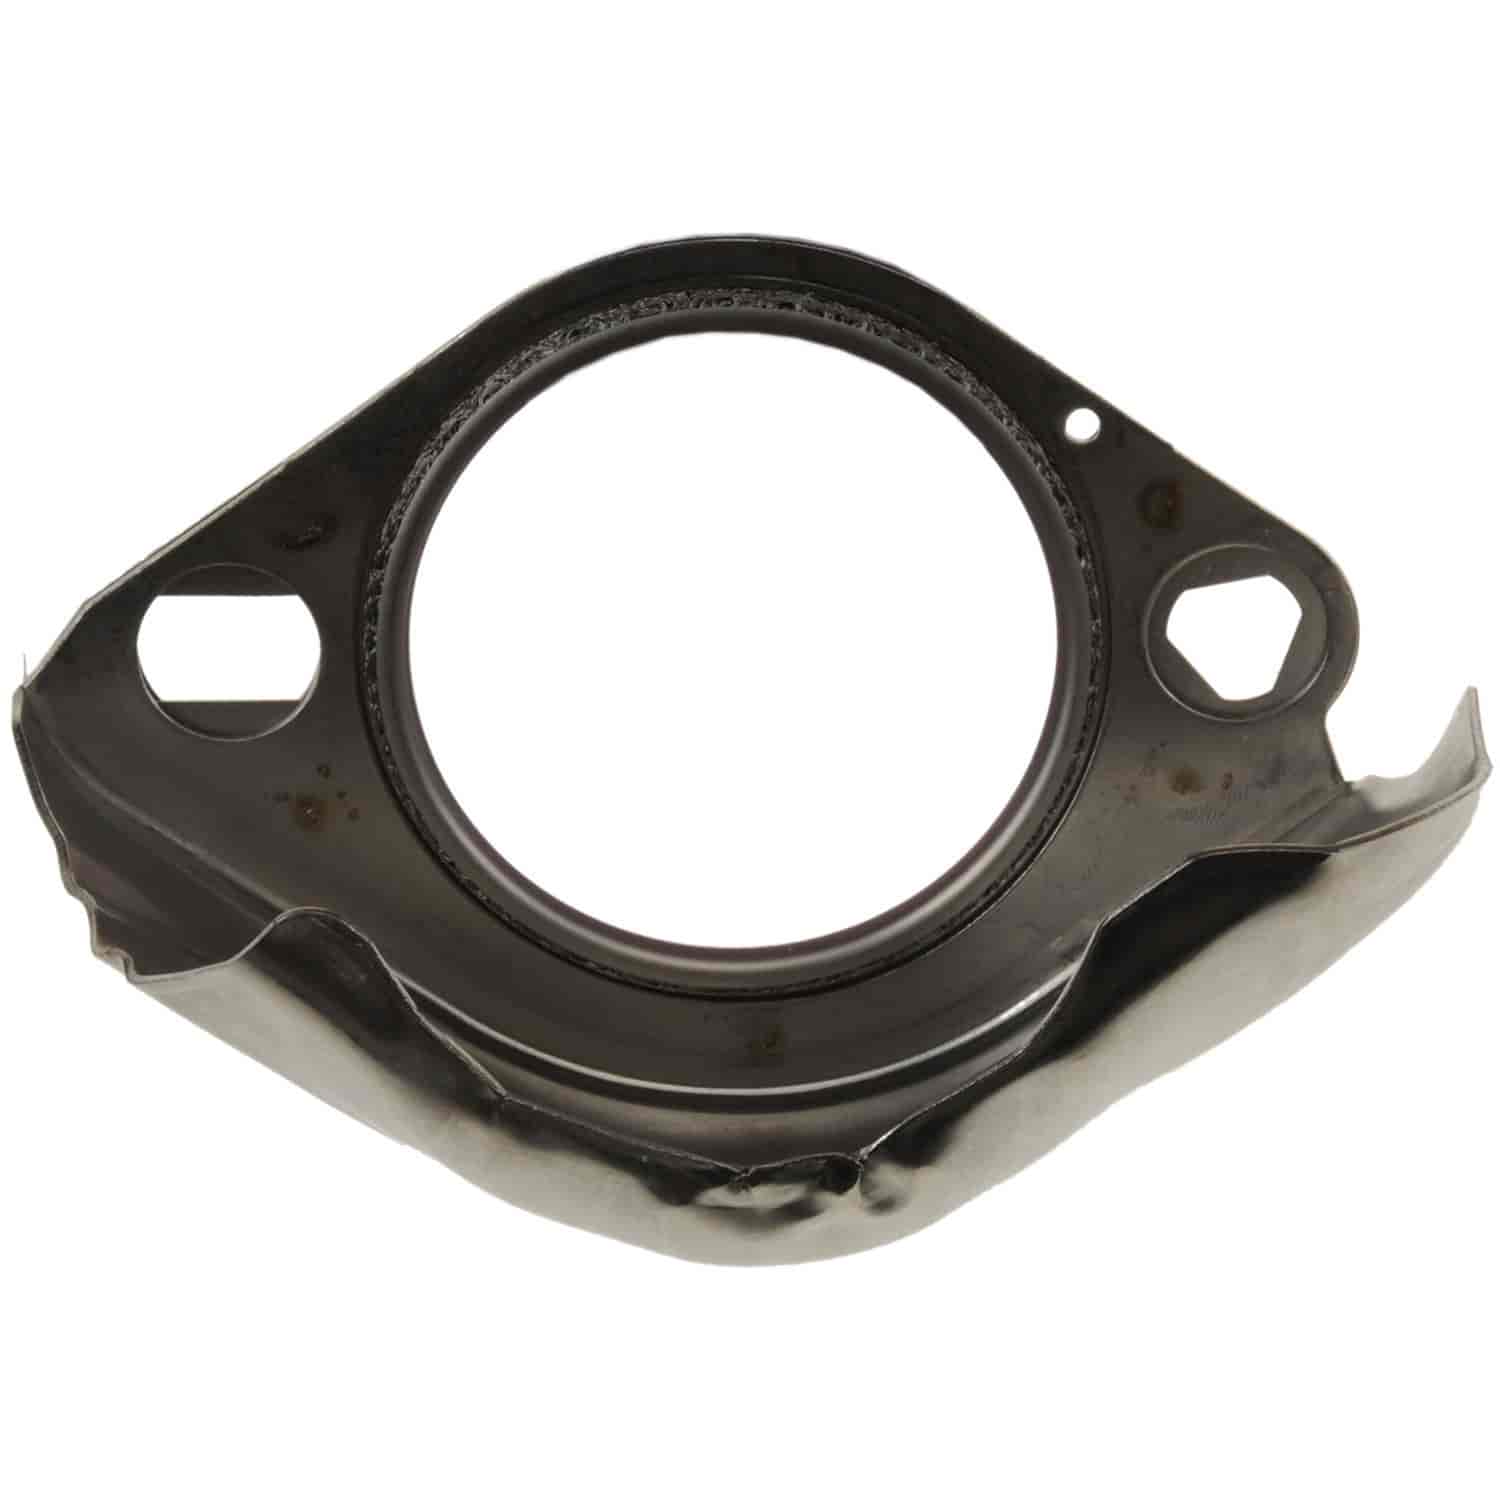 Catalytic Converter Gasket GMC 3.6L High Feature Vin 7 2004-2008 Cadillac CTS SRX